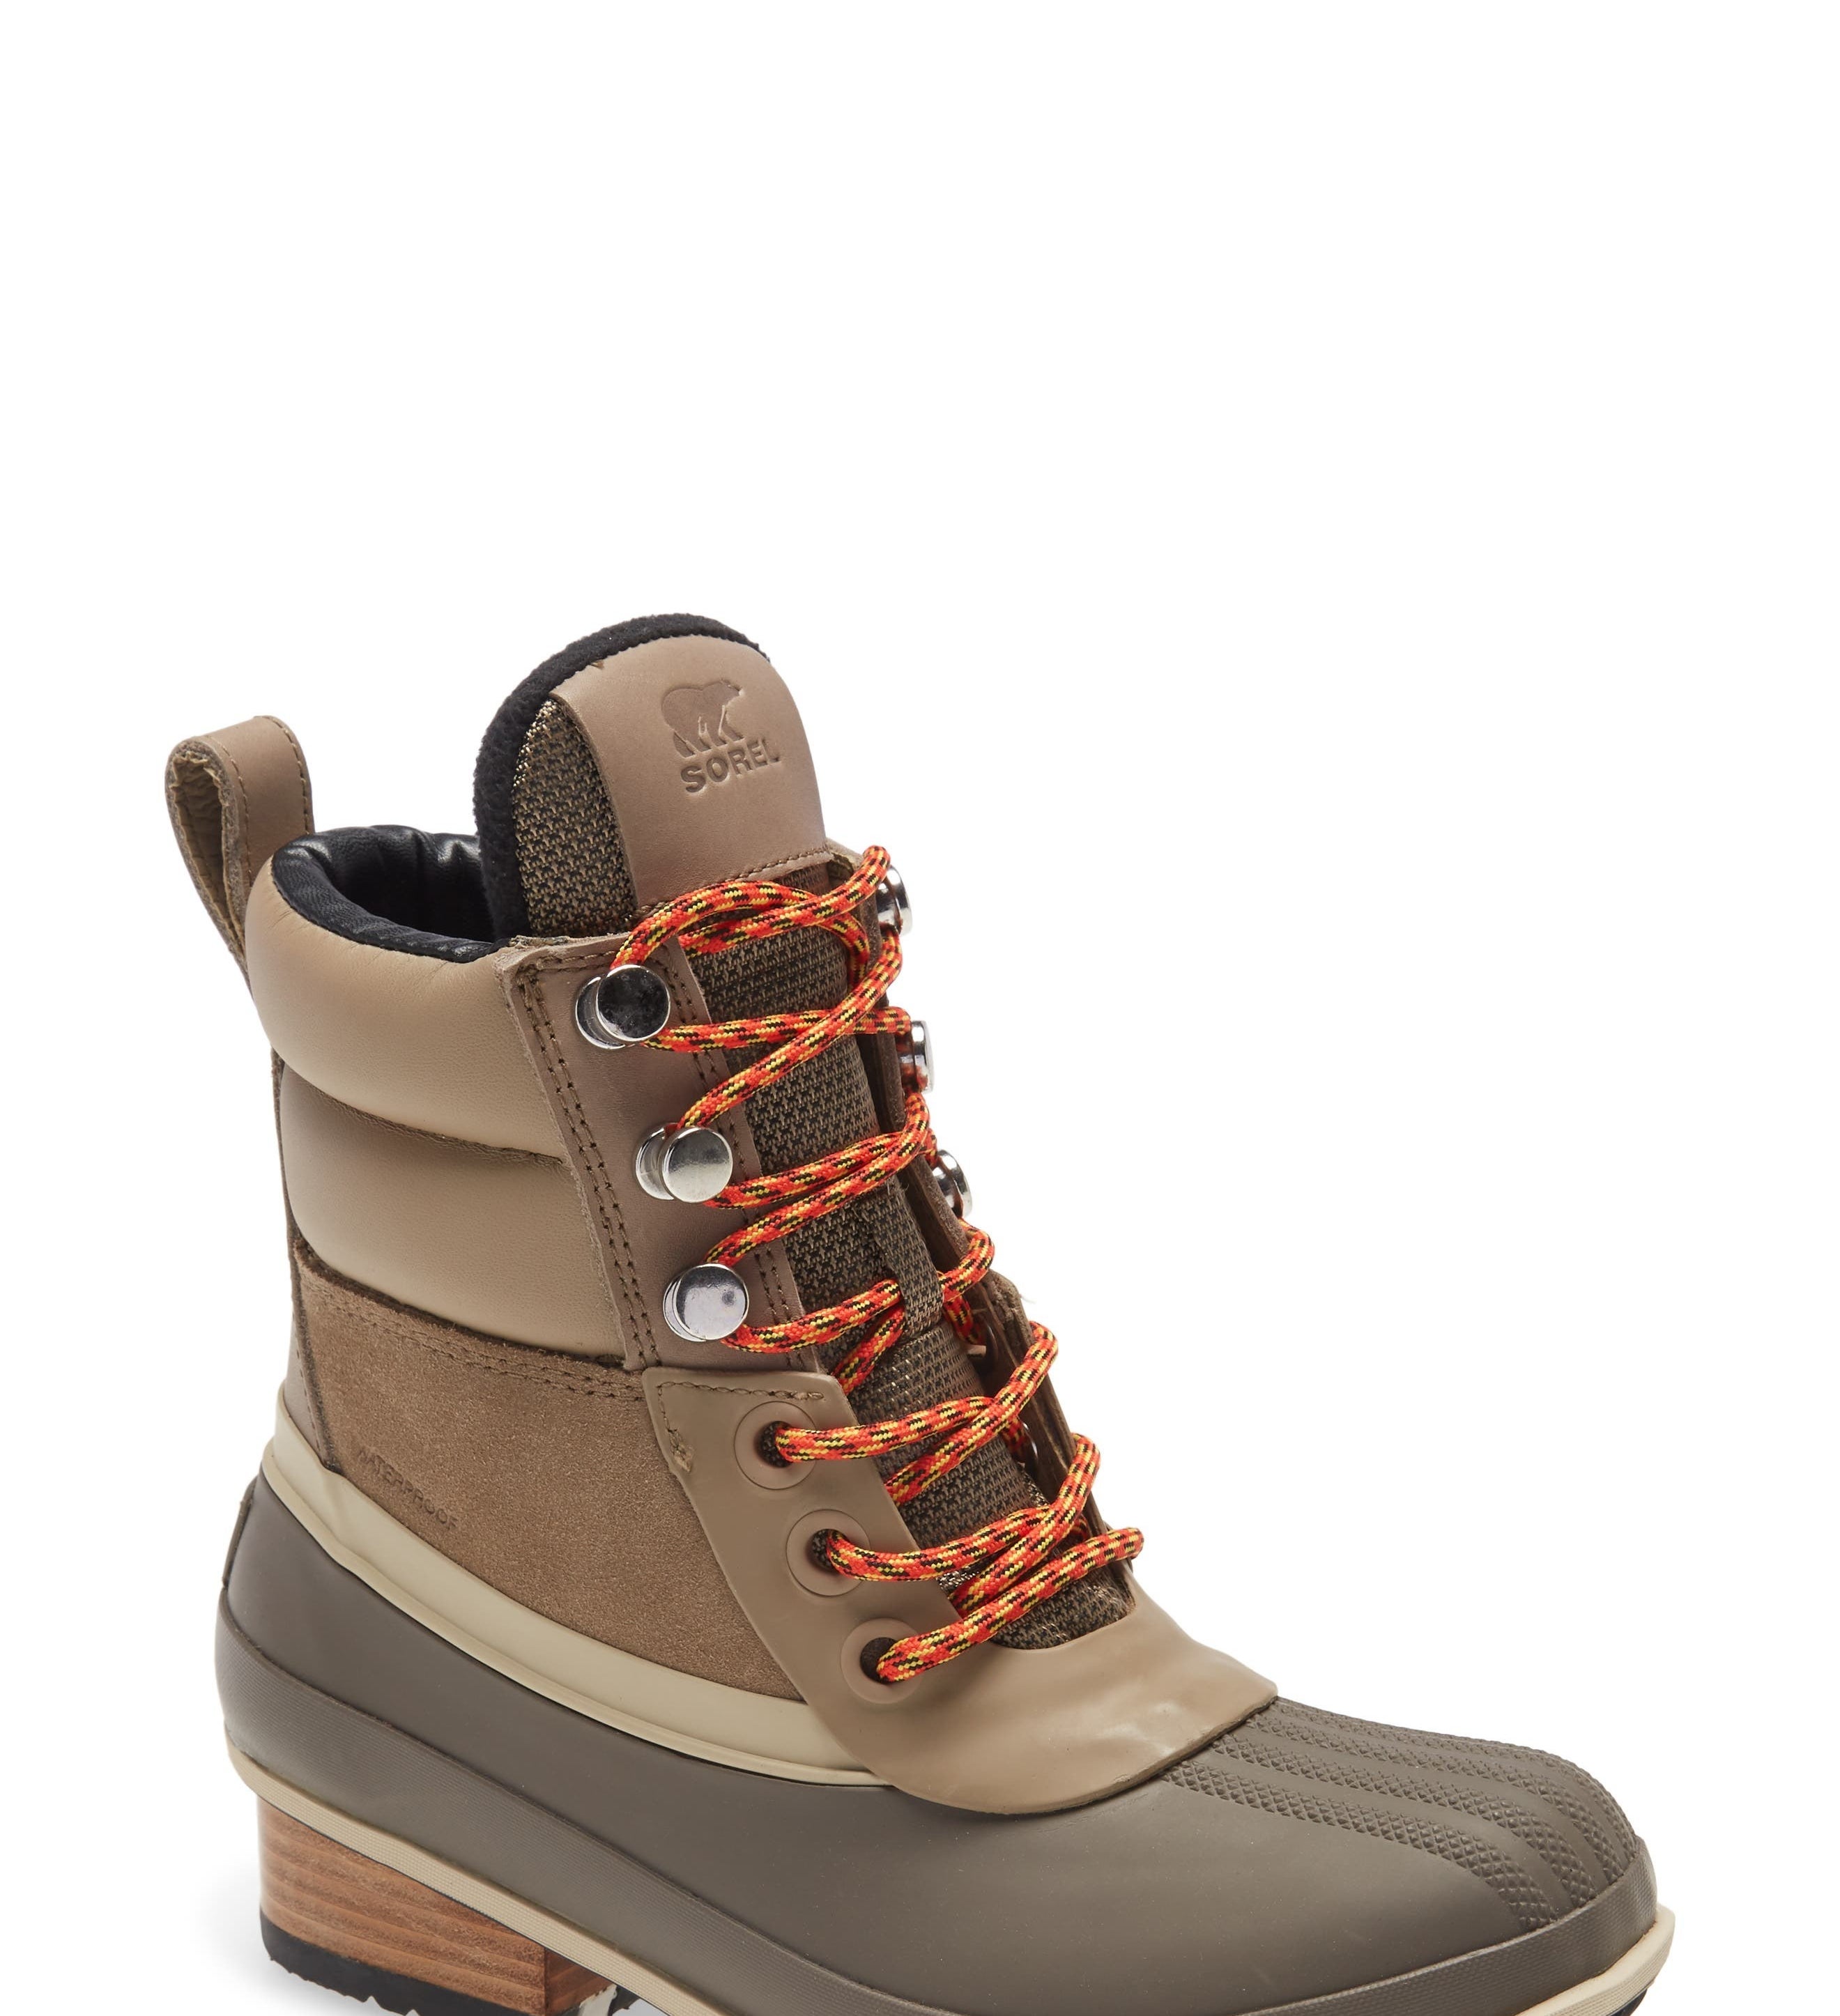 sorel waterproof hiking boot made with brown materials